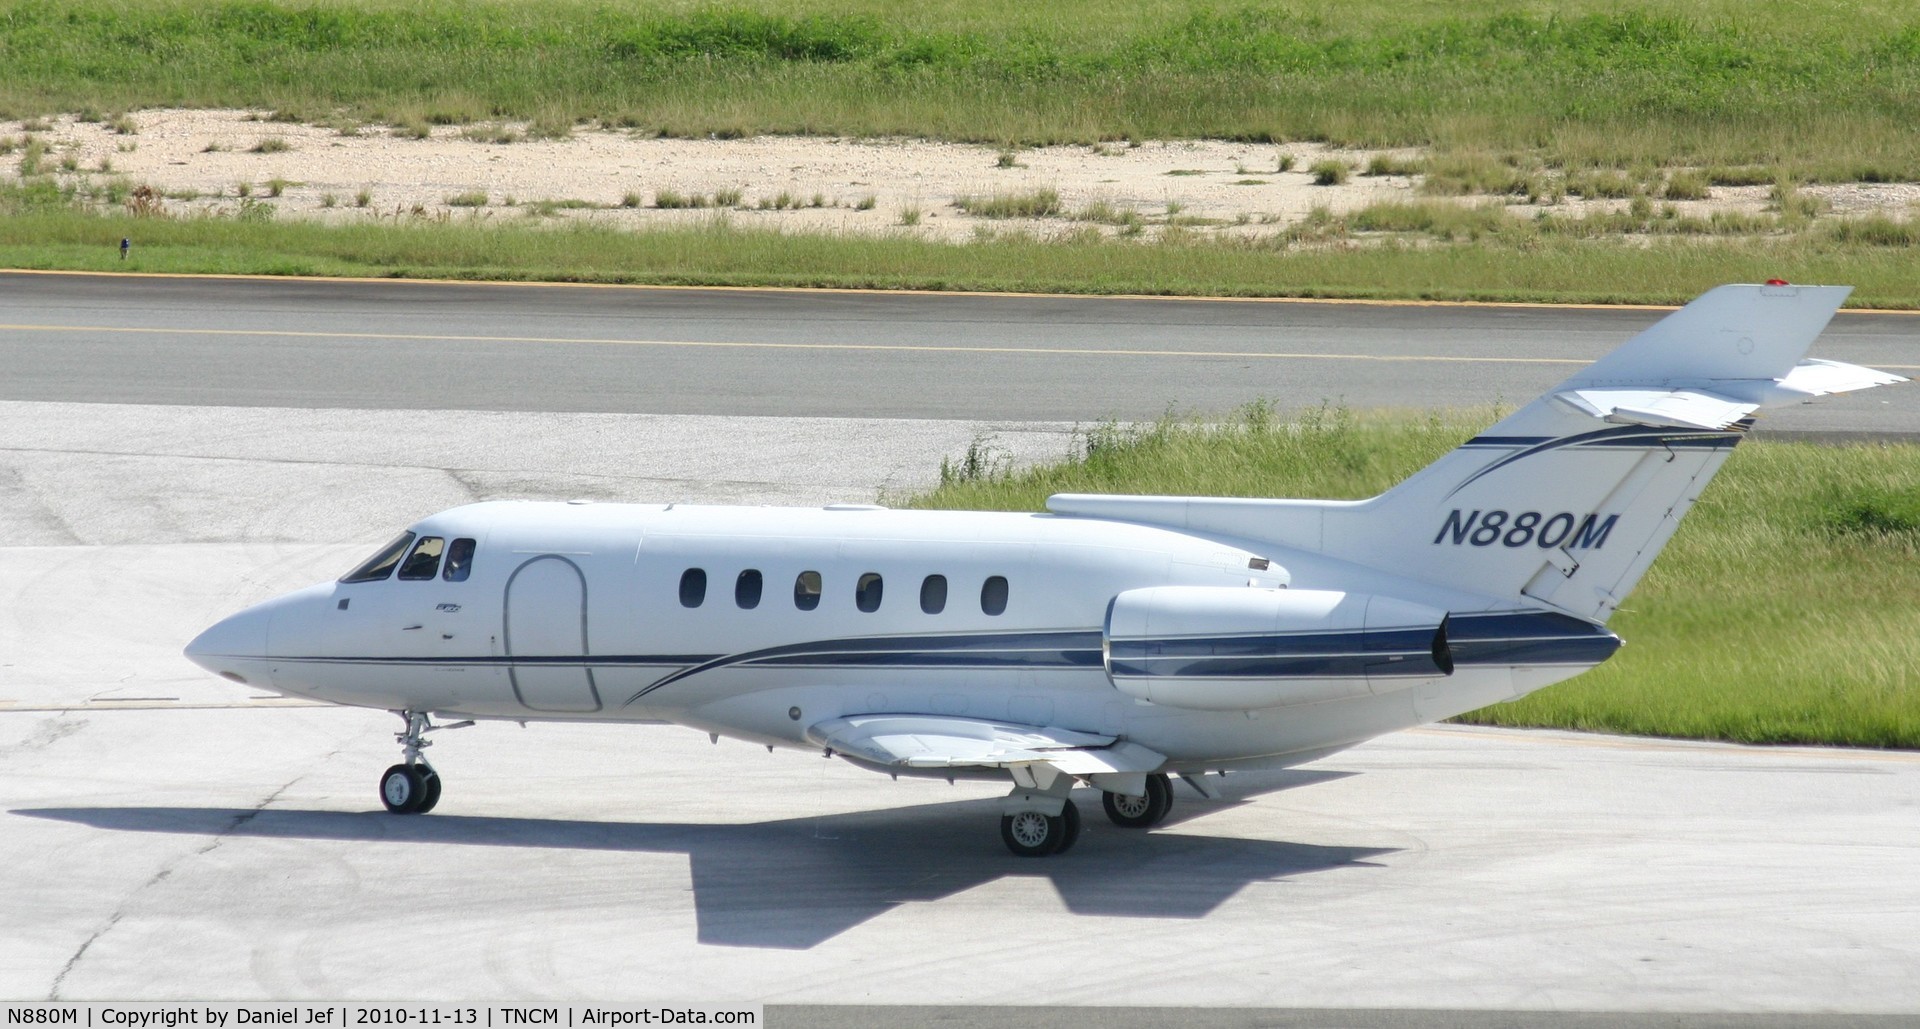 N880M, British Aerospace BAe.125 Series 800A C/N 258027, N880M leaving the parking at the cargo ramp for departure